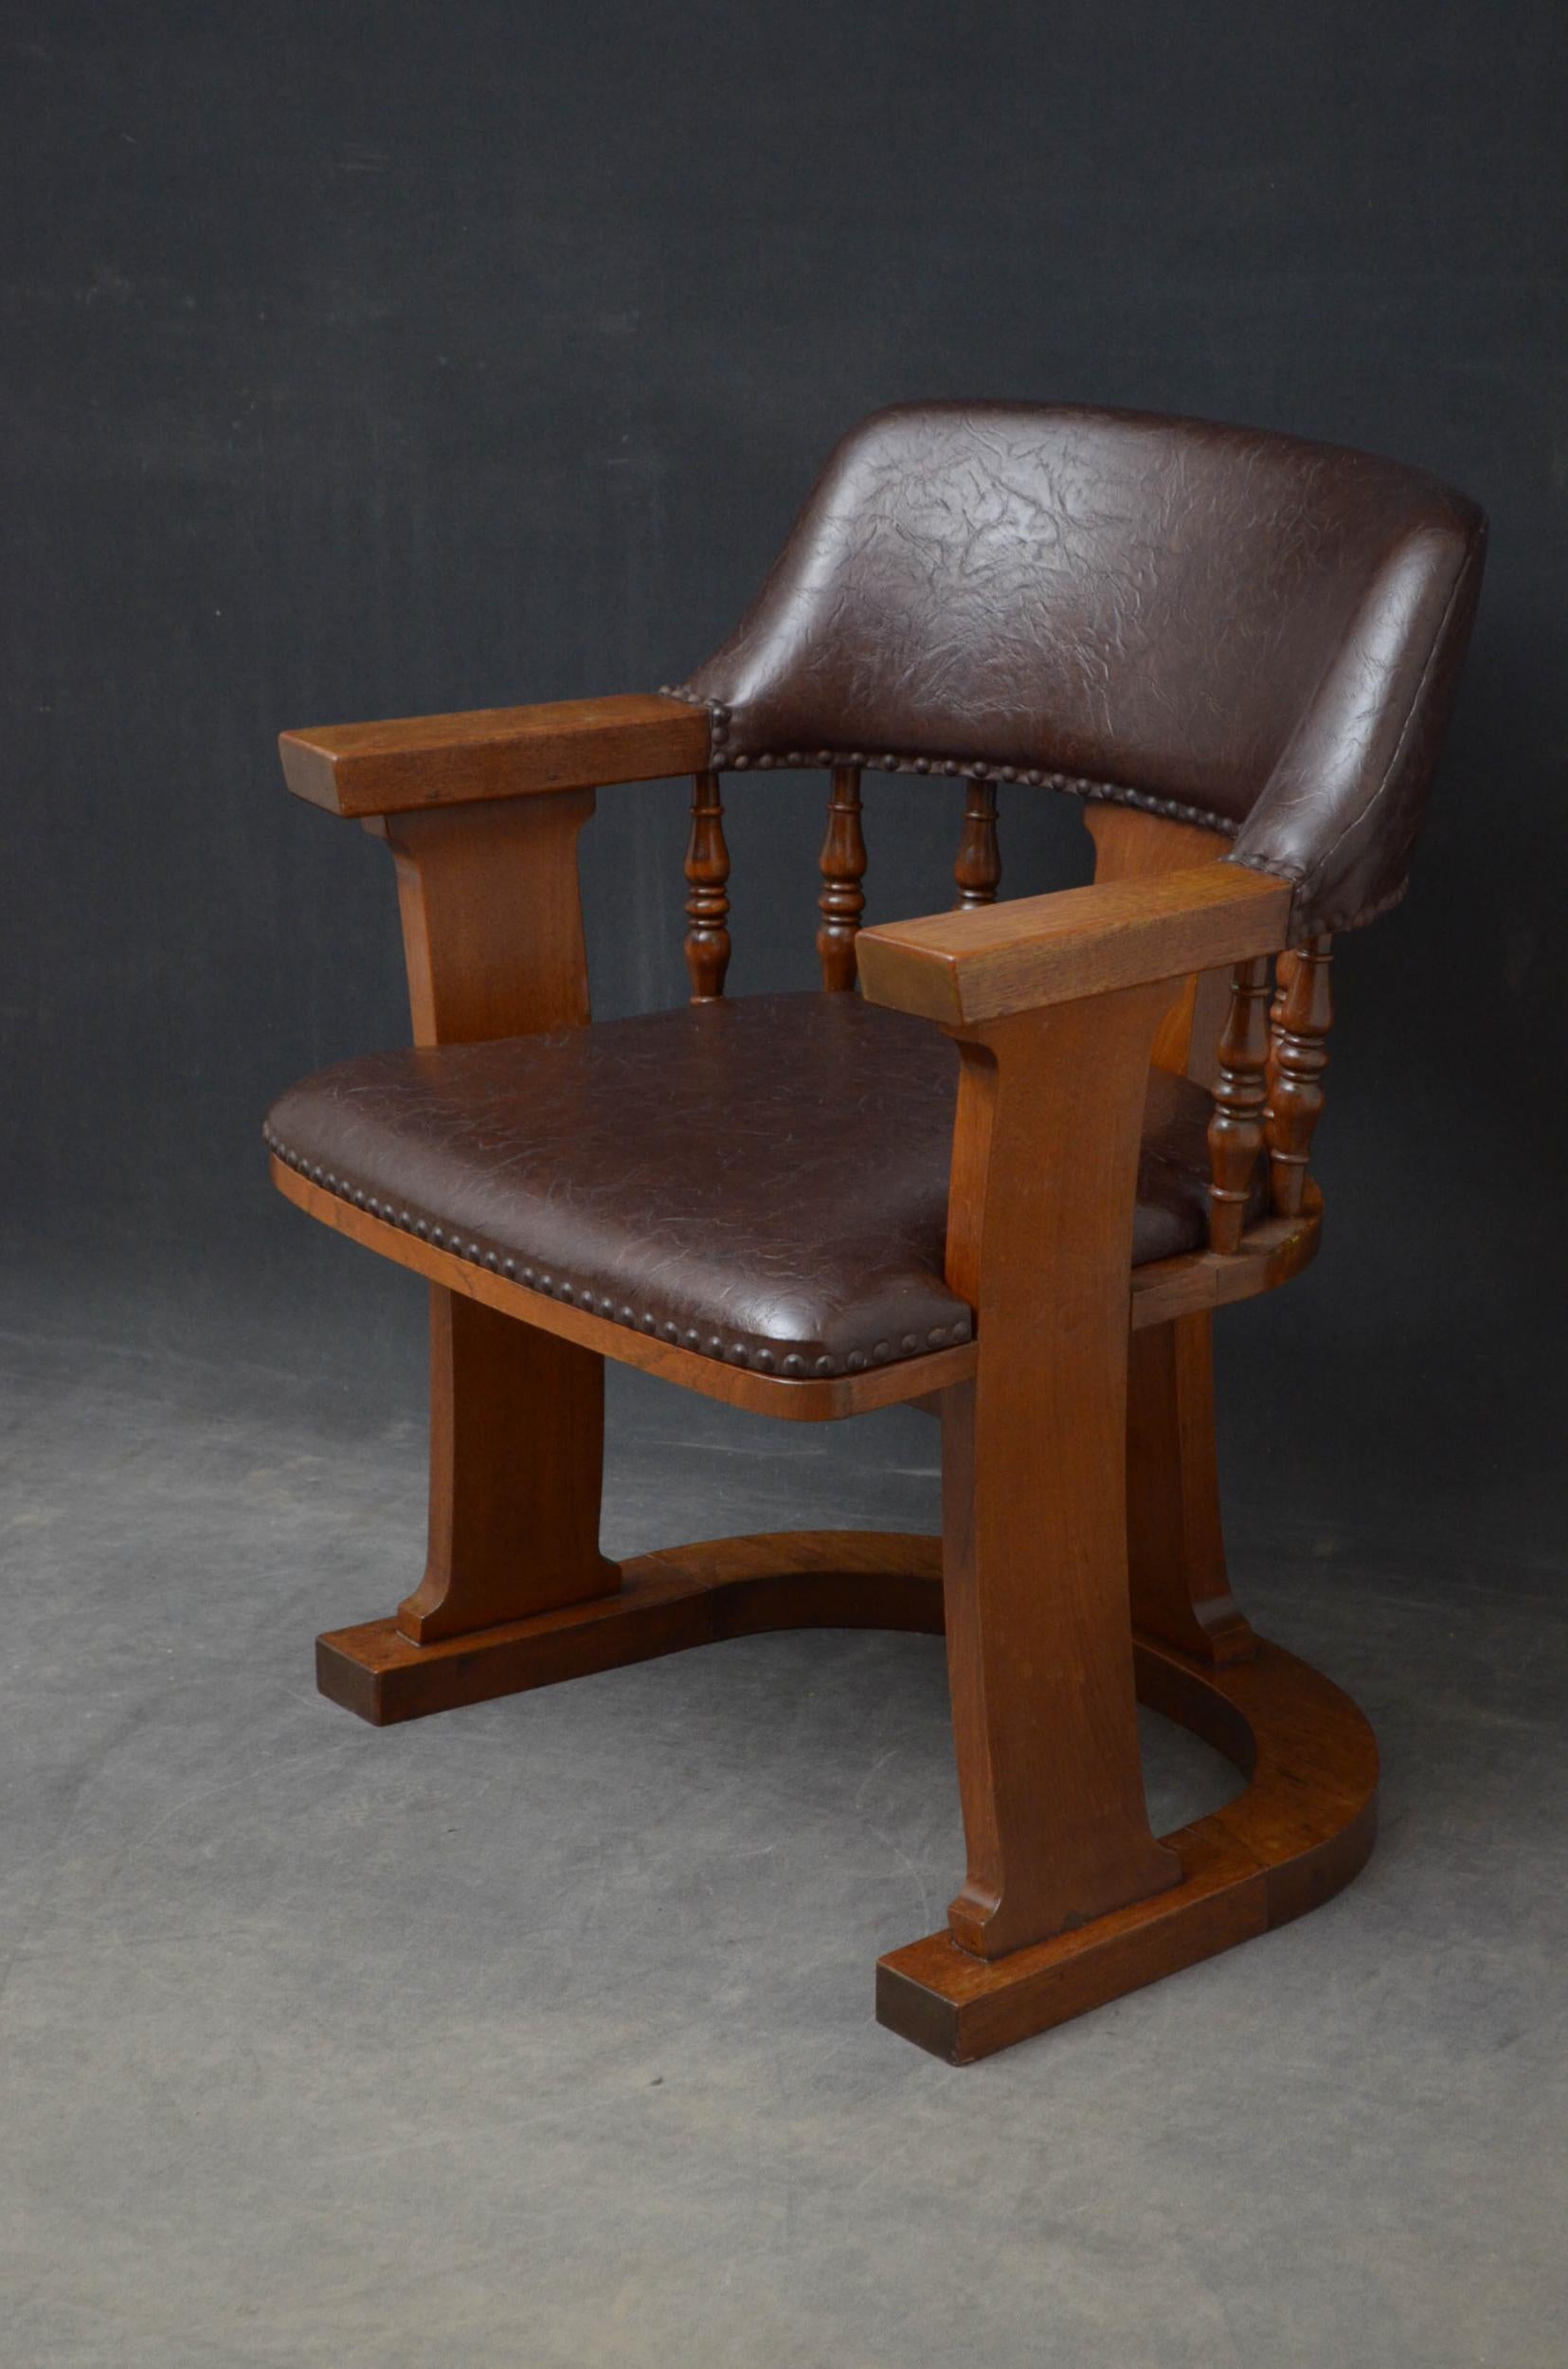 Sn4998 very unusual Arts & Crafts office chair in oak, having leather upholstered top rail above turned spindles and generous leather seat flanked by open arms terminating in substantial uprights, all united by U shaped supports. This antique chair